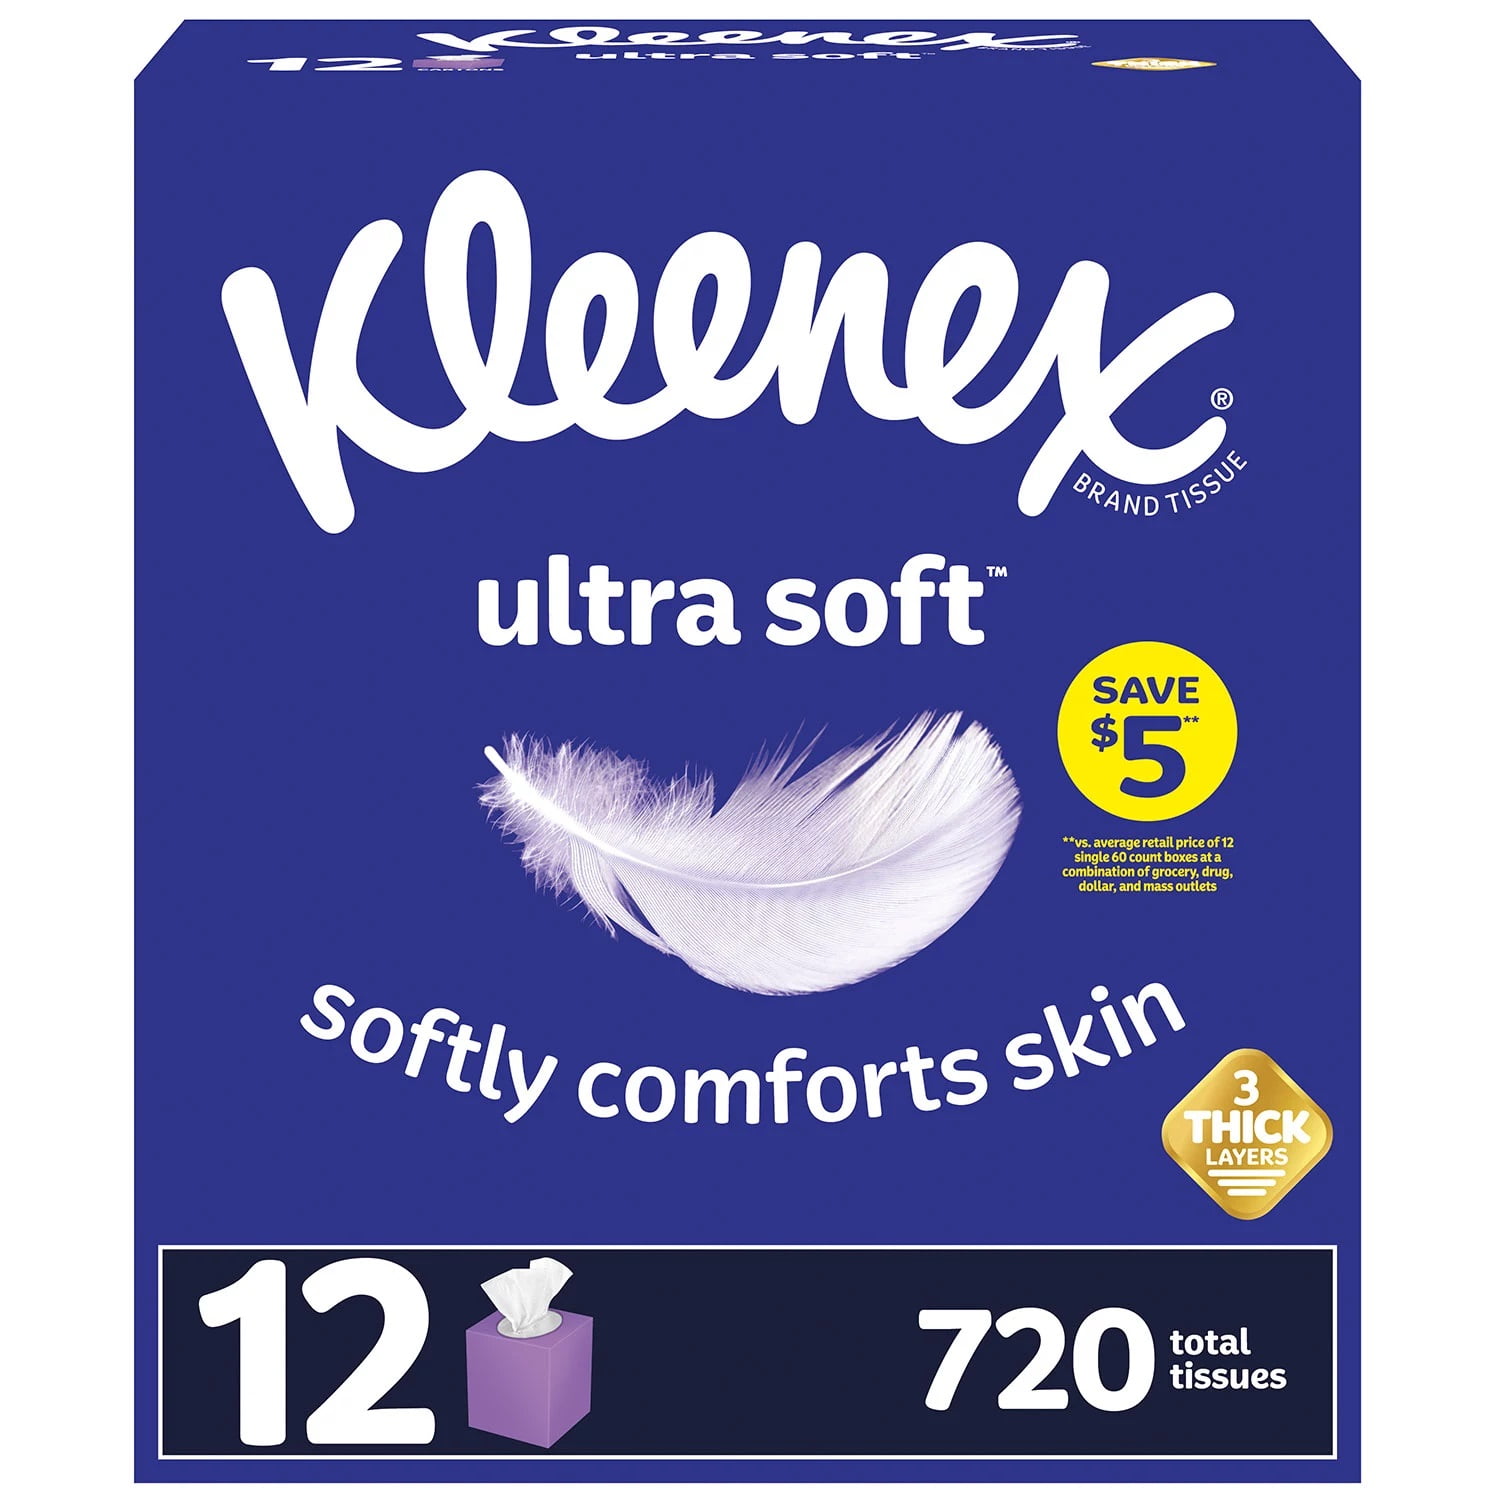 Kleenex Trusted Care 2-ply 230-count Facial Tissue 10-pack 